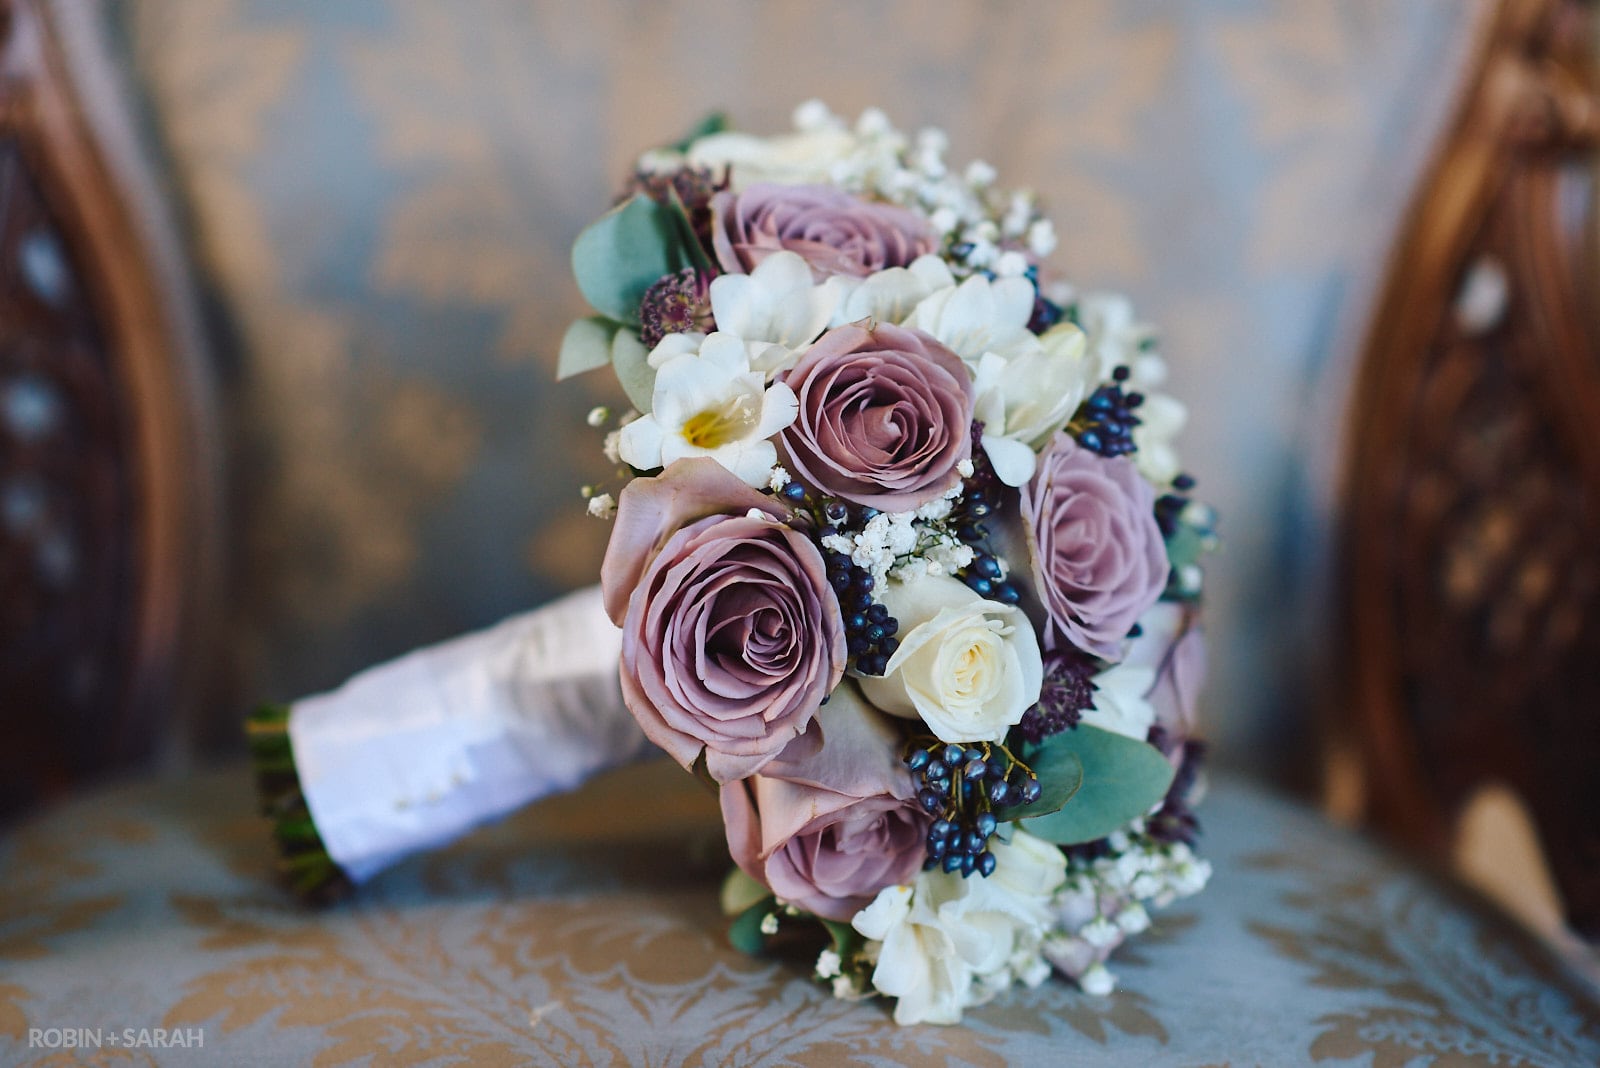 Wedding dress and flowers at Stanbrook Abbey